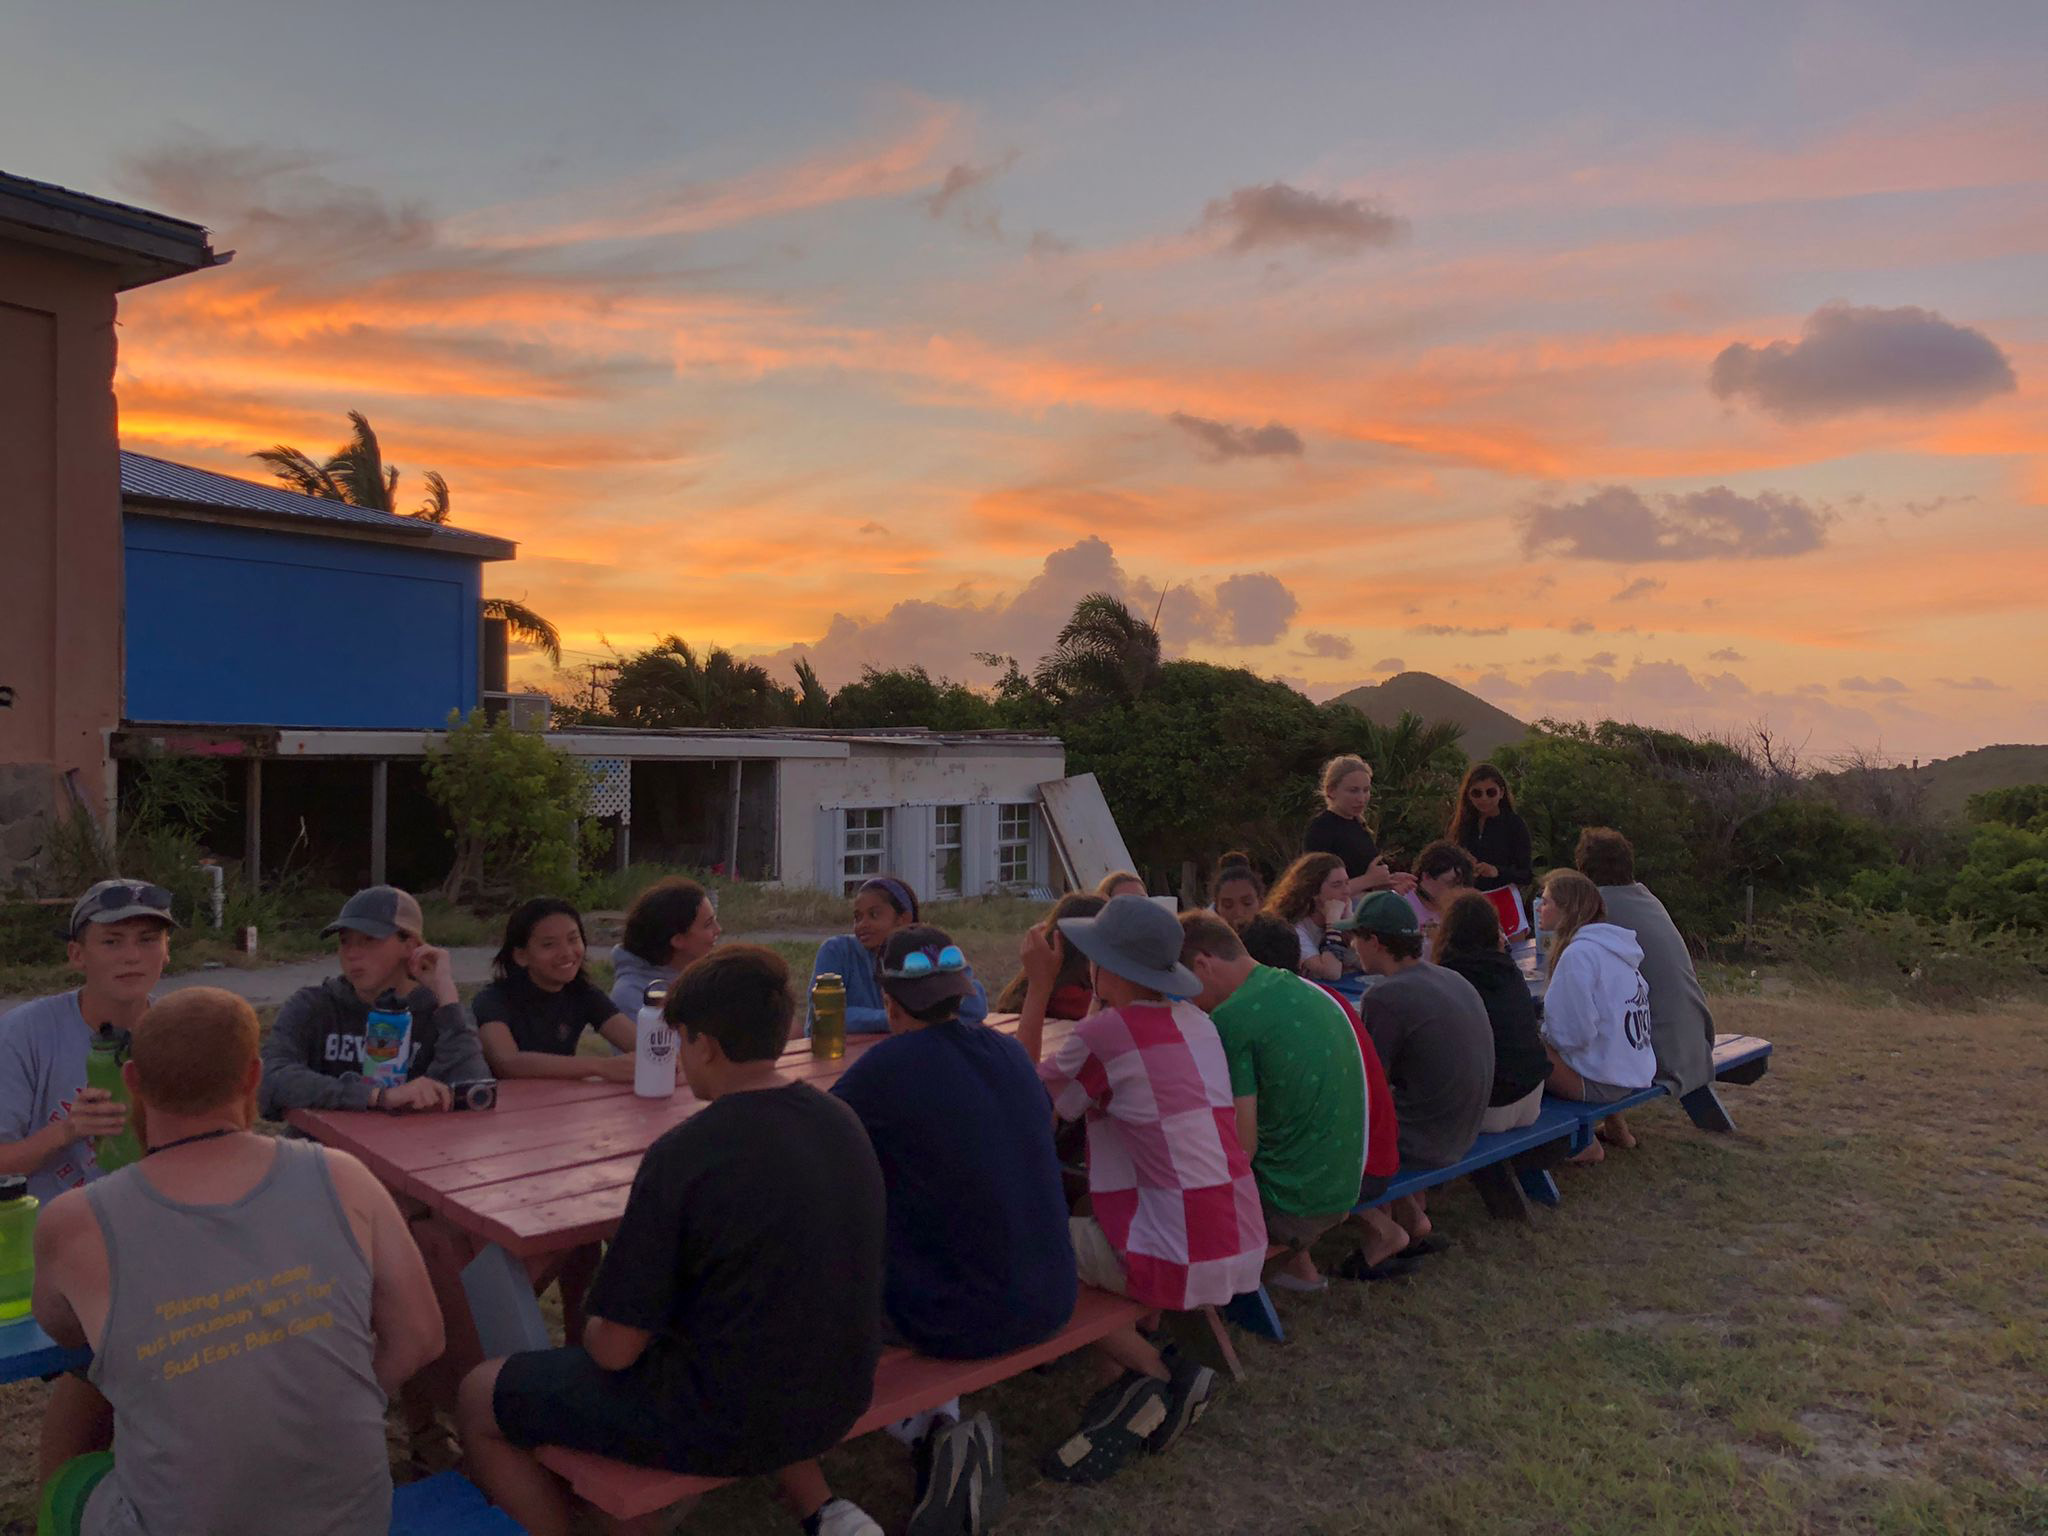 VISIONS BVI, Participants gathered for dinner during sunset.